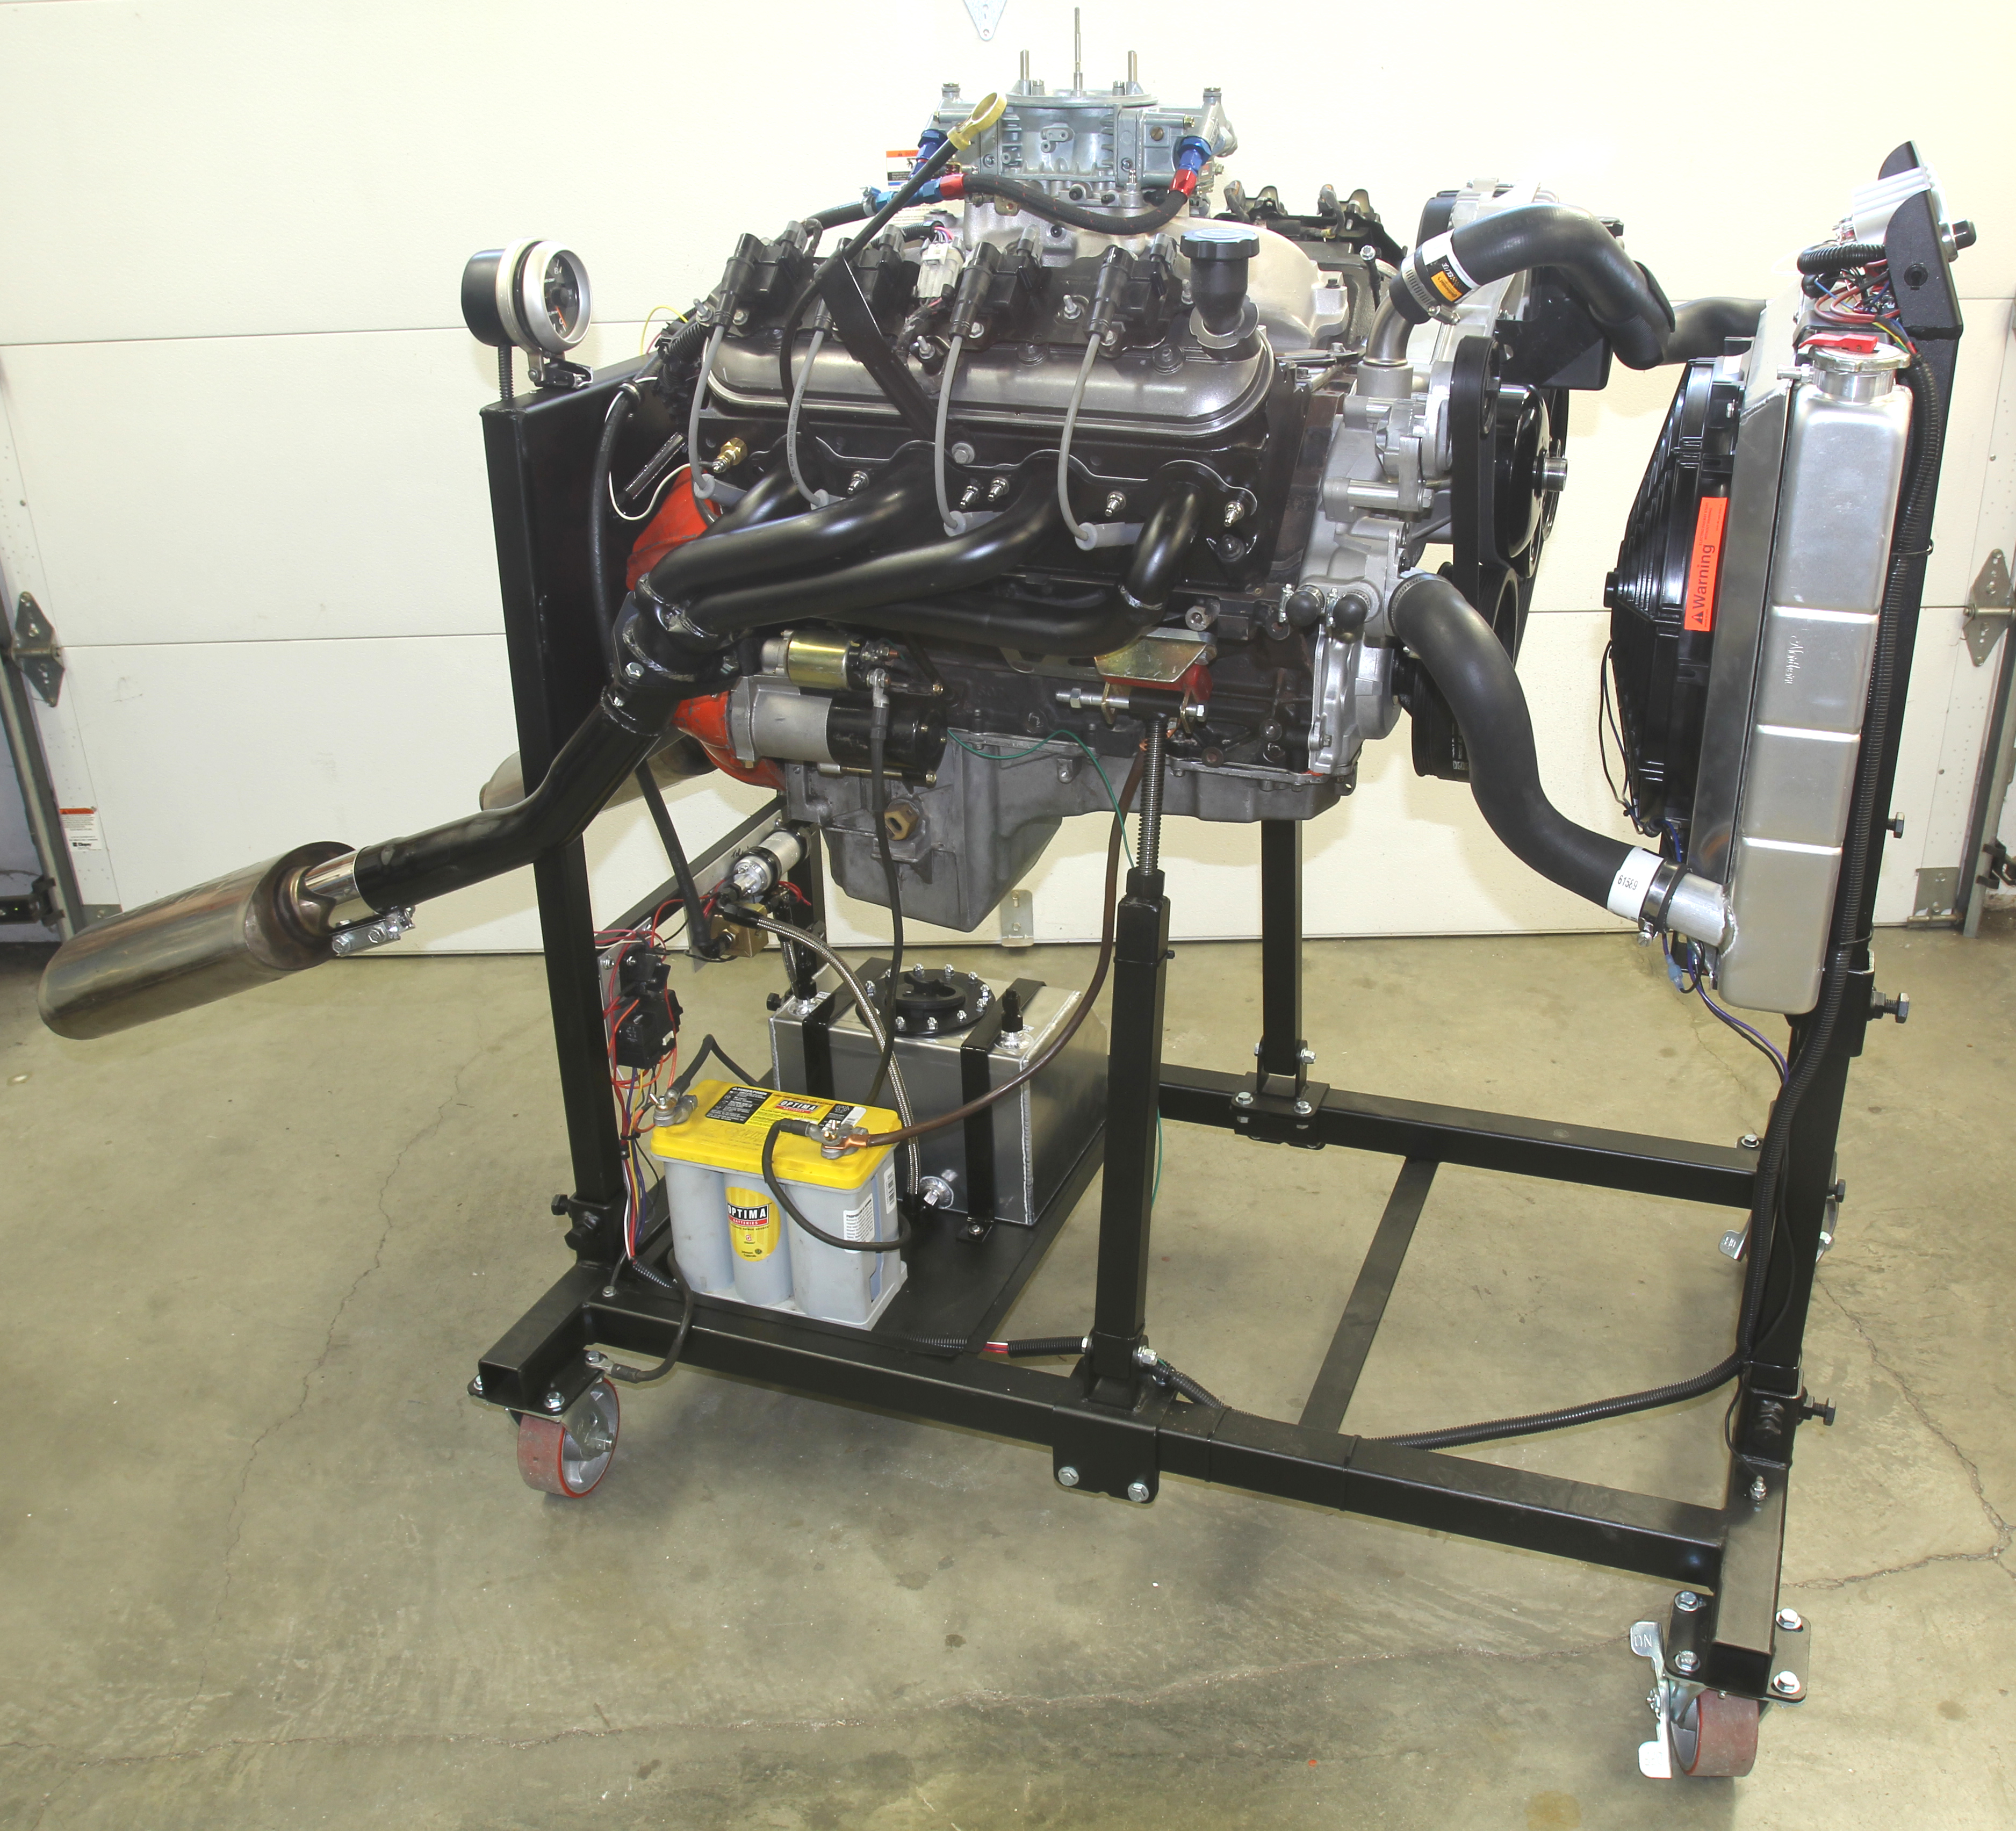 Take a Stand! Building Summit Racing's Engine Test Stand ... 1984 chevy truck wiring diagram 